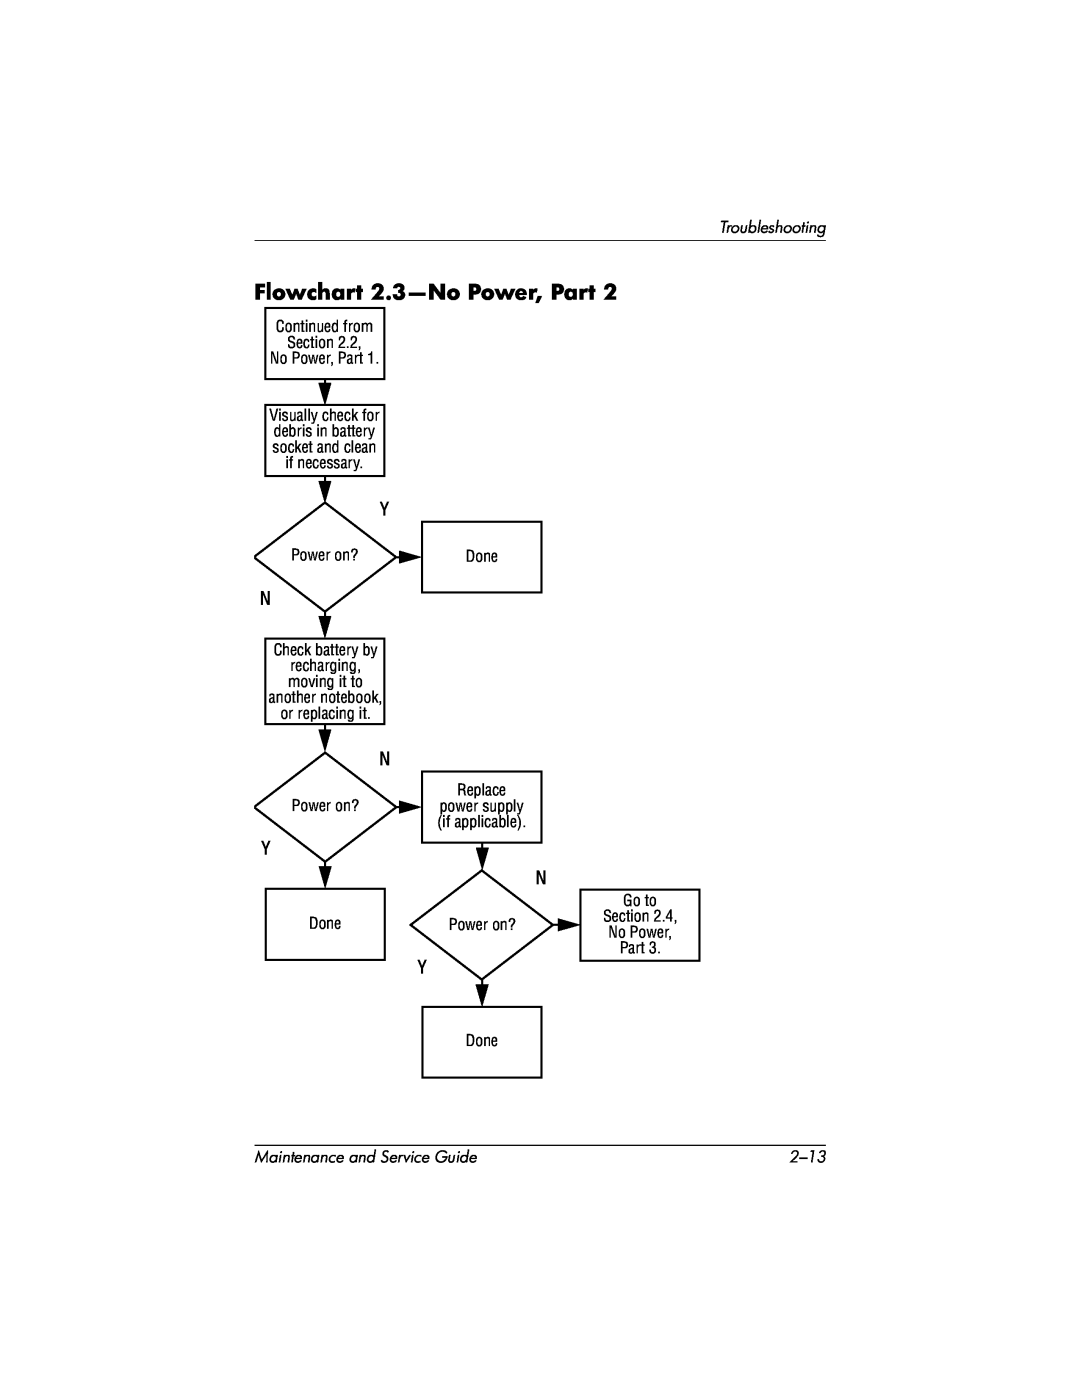 HP nx7000 Flowchart 2.3-No Power, Part, Troubleshooting, Maintenance and Service Guide, 2-13, power supply if applicable 